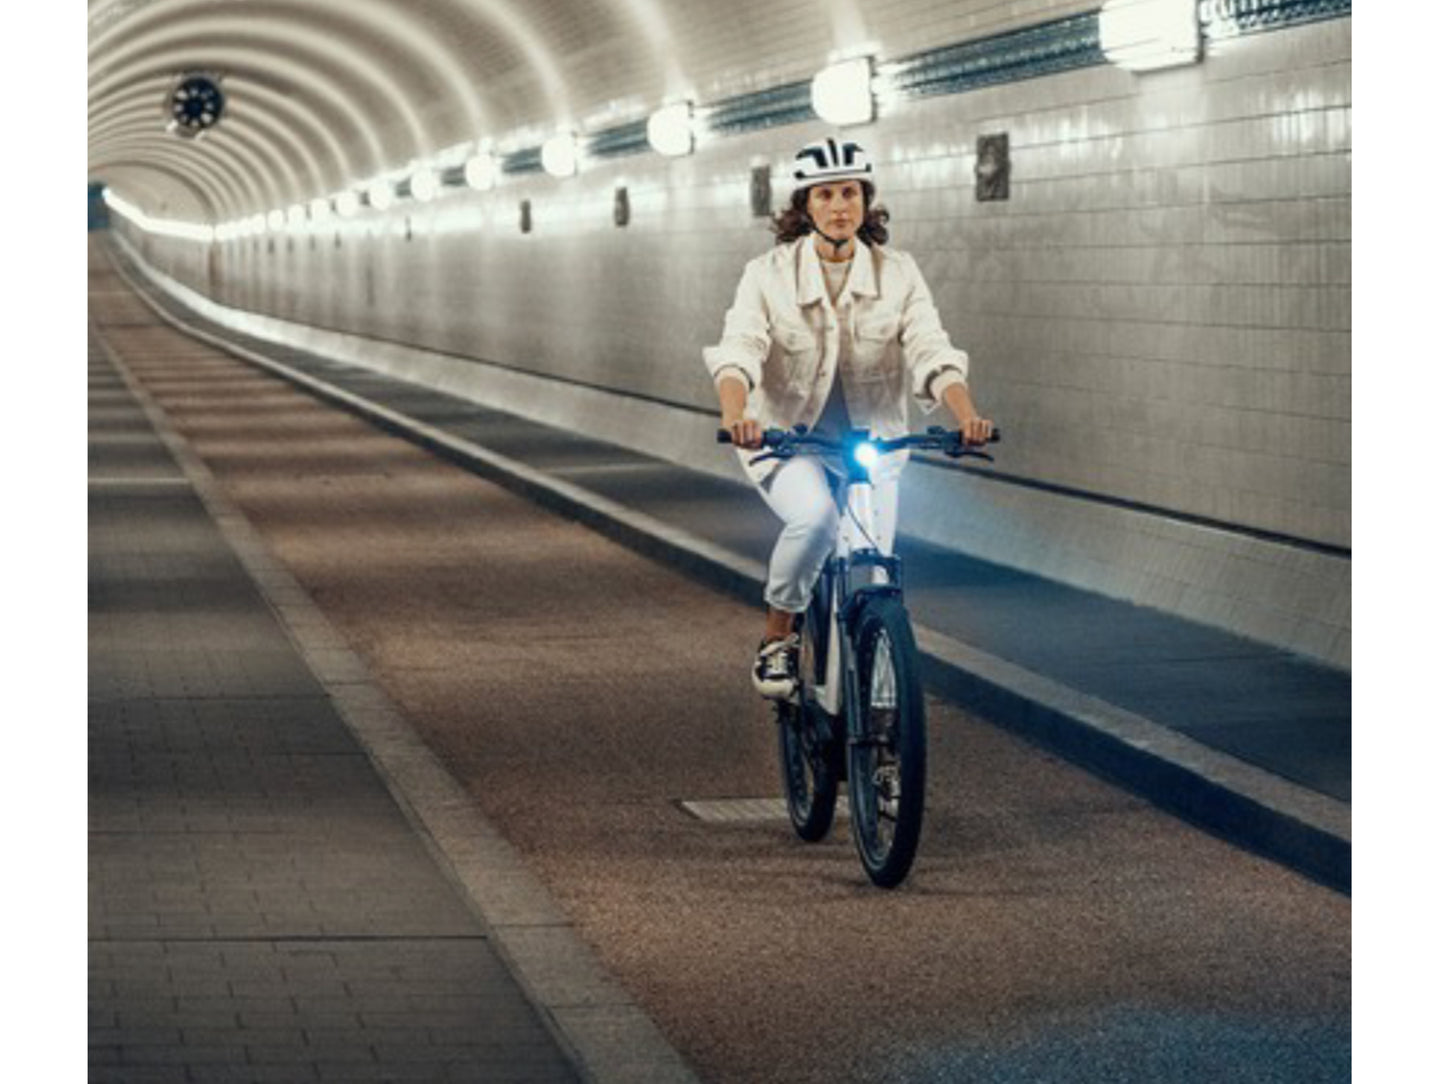 Riese and Muller Nevo GT Vario emtb hardtail woman riding on city tunnel bike path headlight on